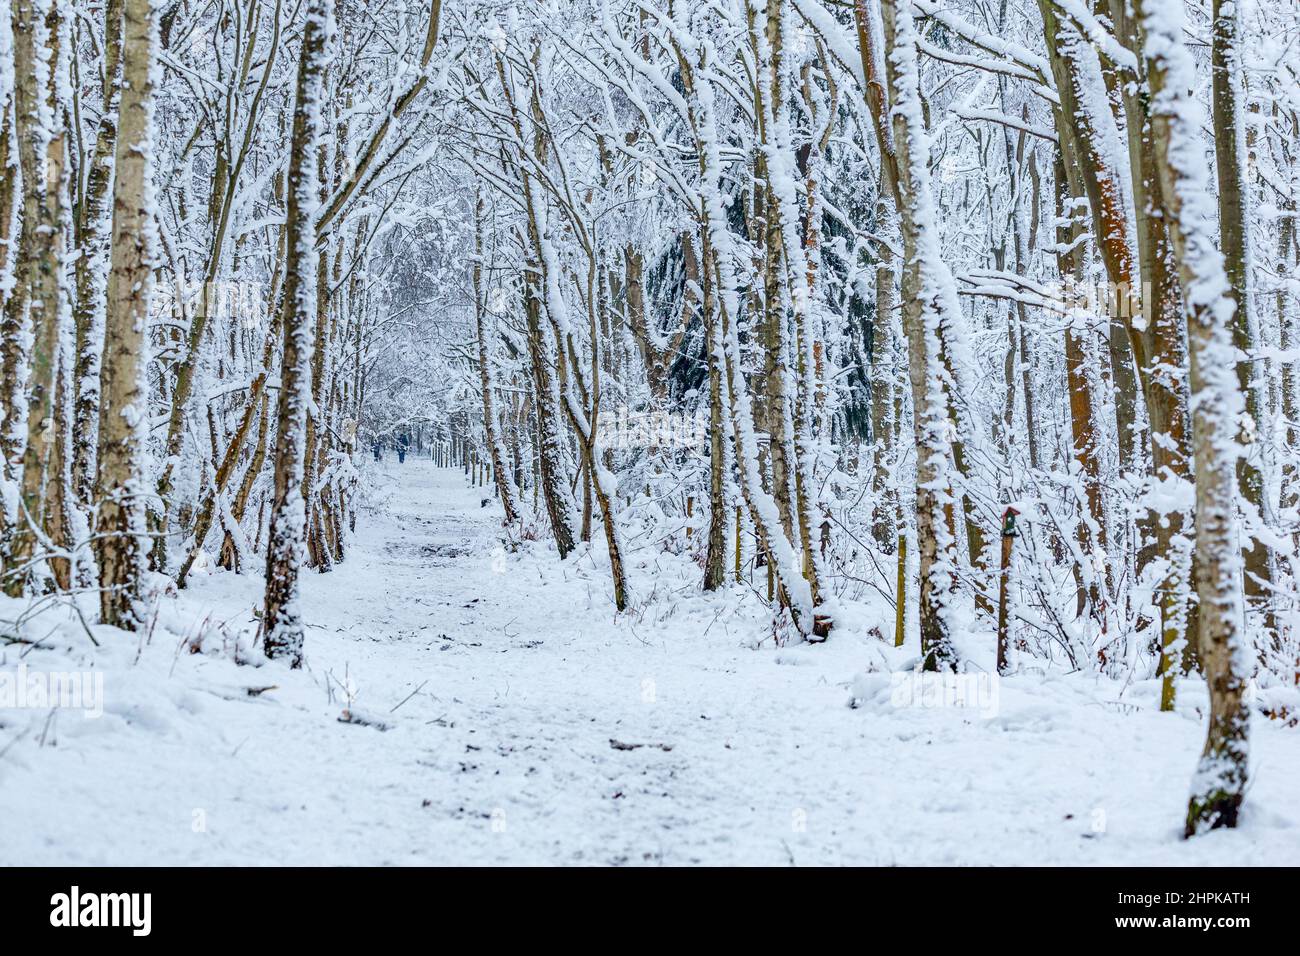 A typical winter landscape scene in England, Great Britain Stock Photo